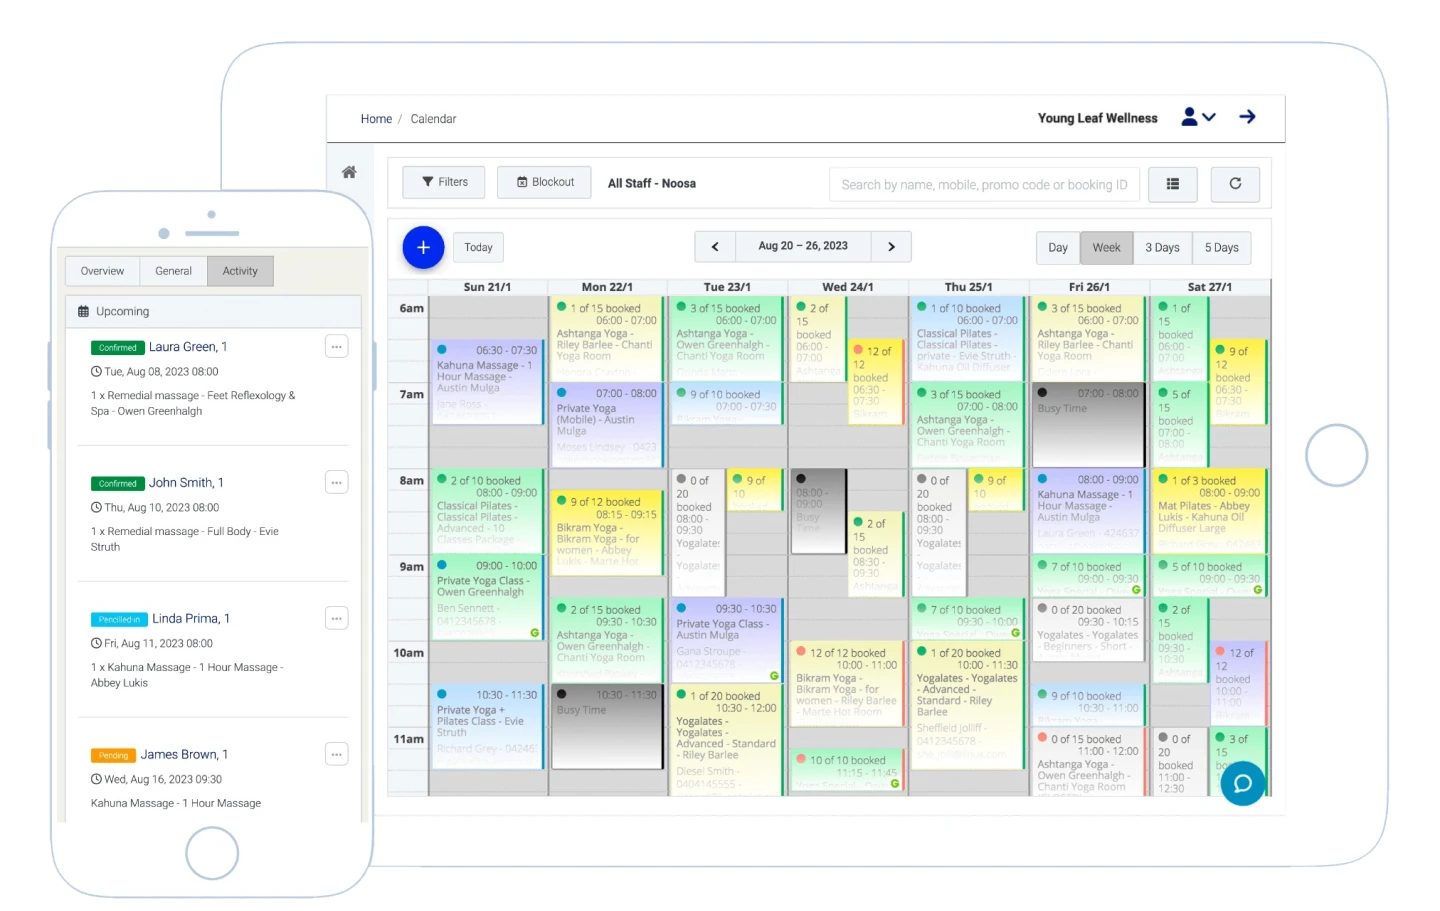 Nabooki booking system calendar and upcoming bookings screenshots on mobile devices